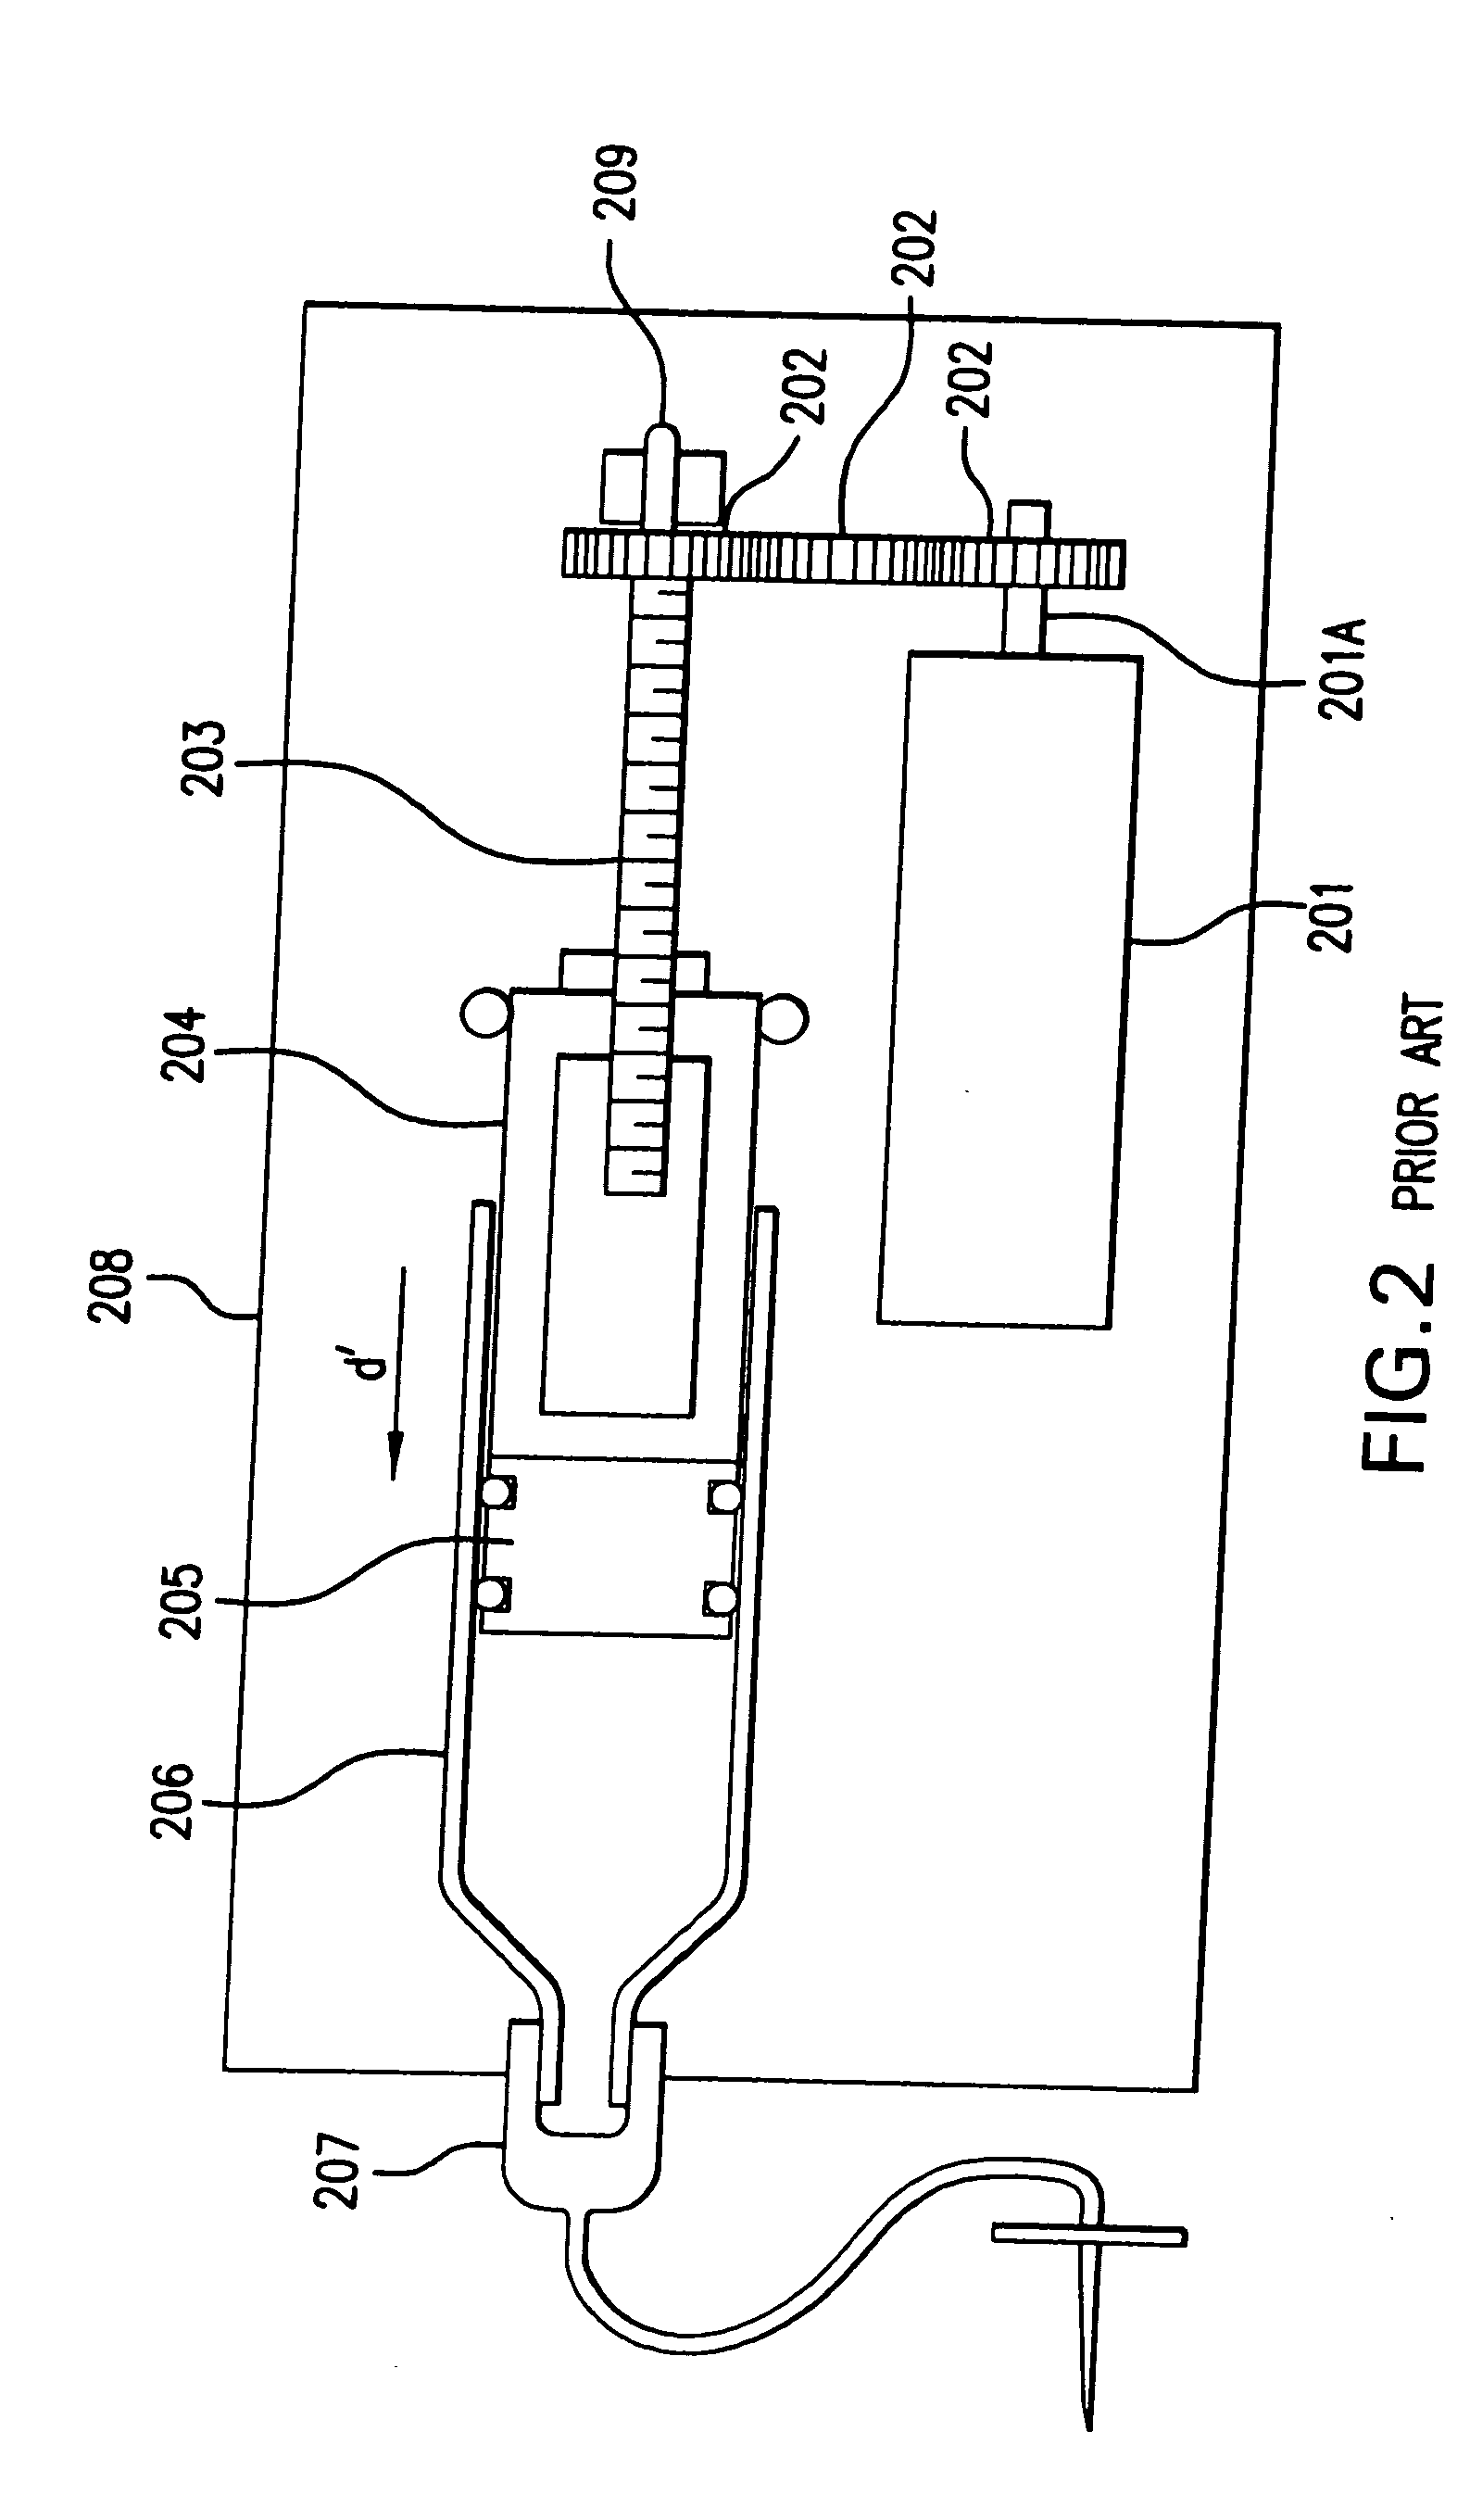 Methods and apparatuses for detecting occlusions in an ambulatory infusion pump